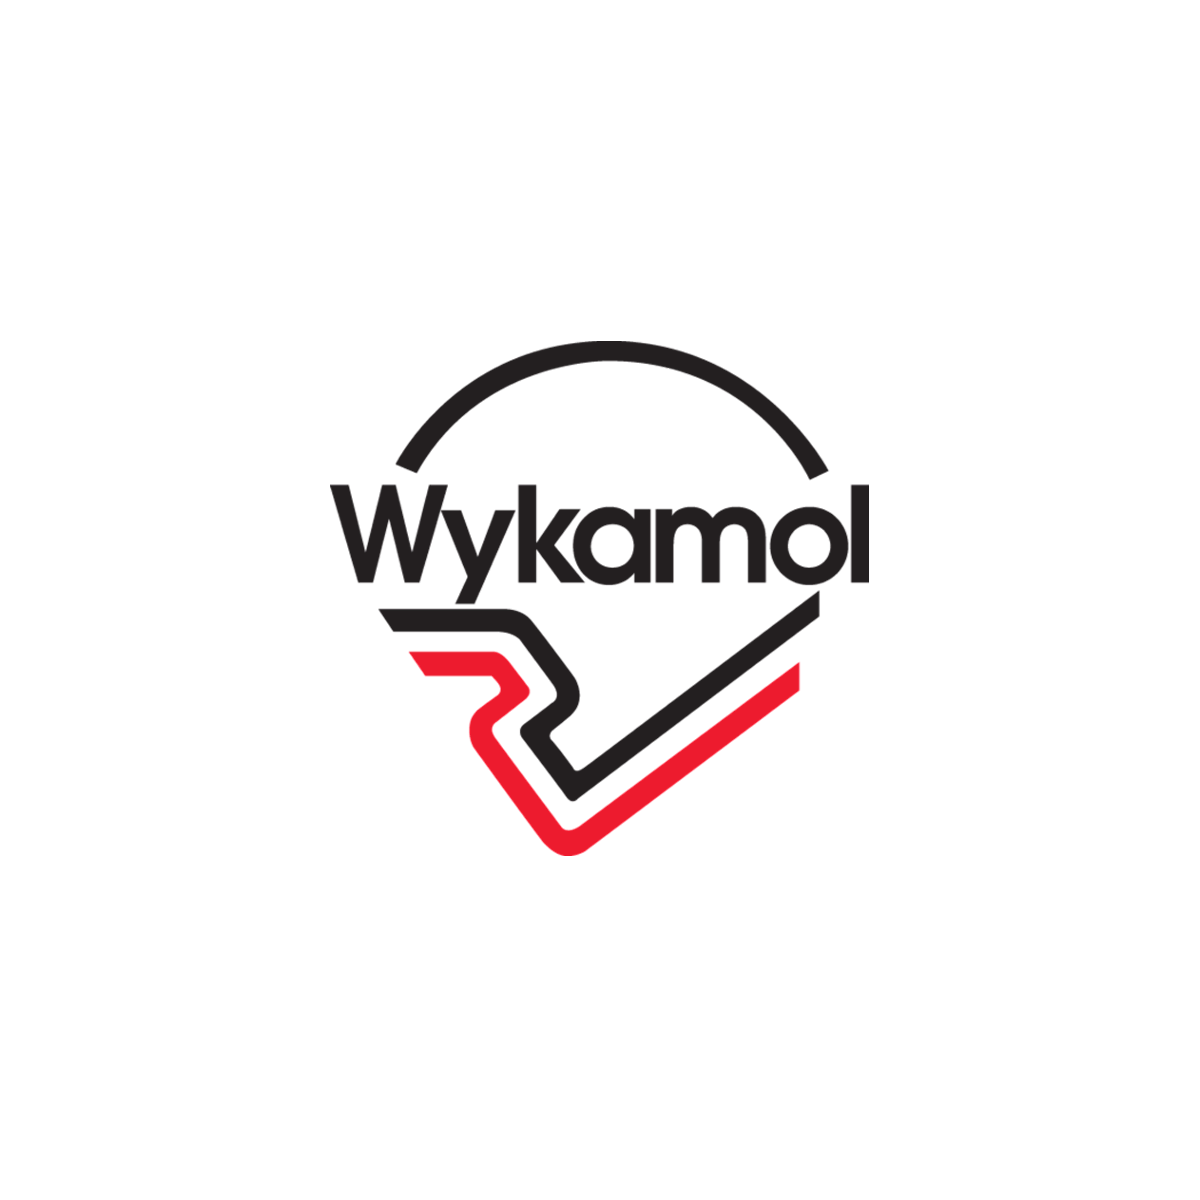 Where to Buy Wykamol Products